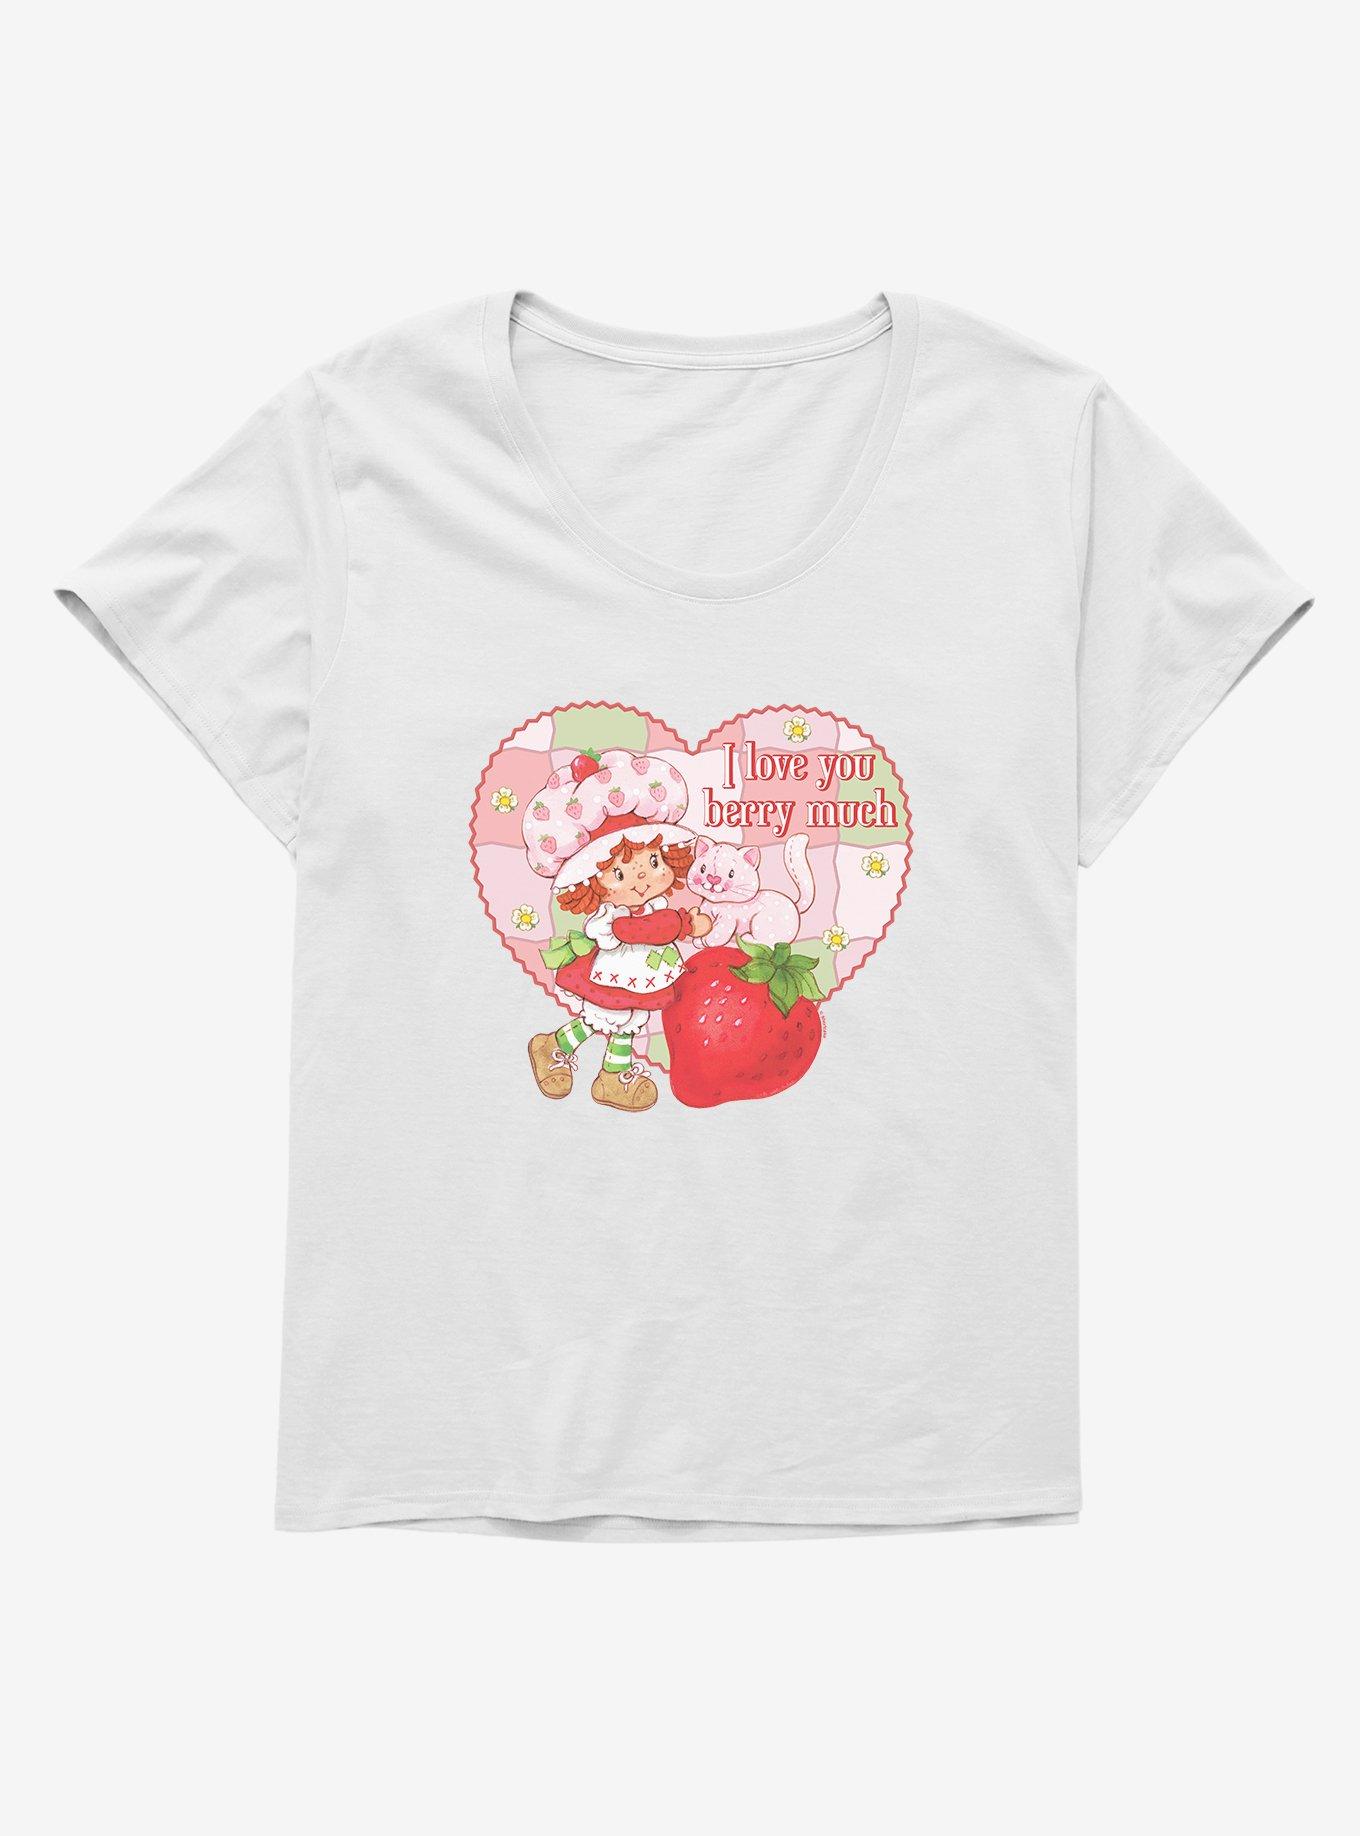 Strawberry Shortcake I Love You Berry Much Womens T-Shirt Plus Size, WHITE, hi-res